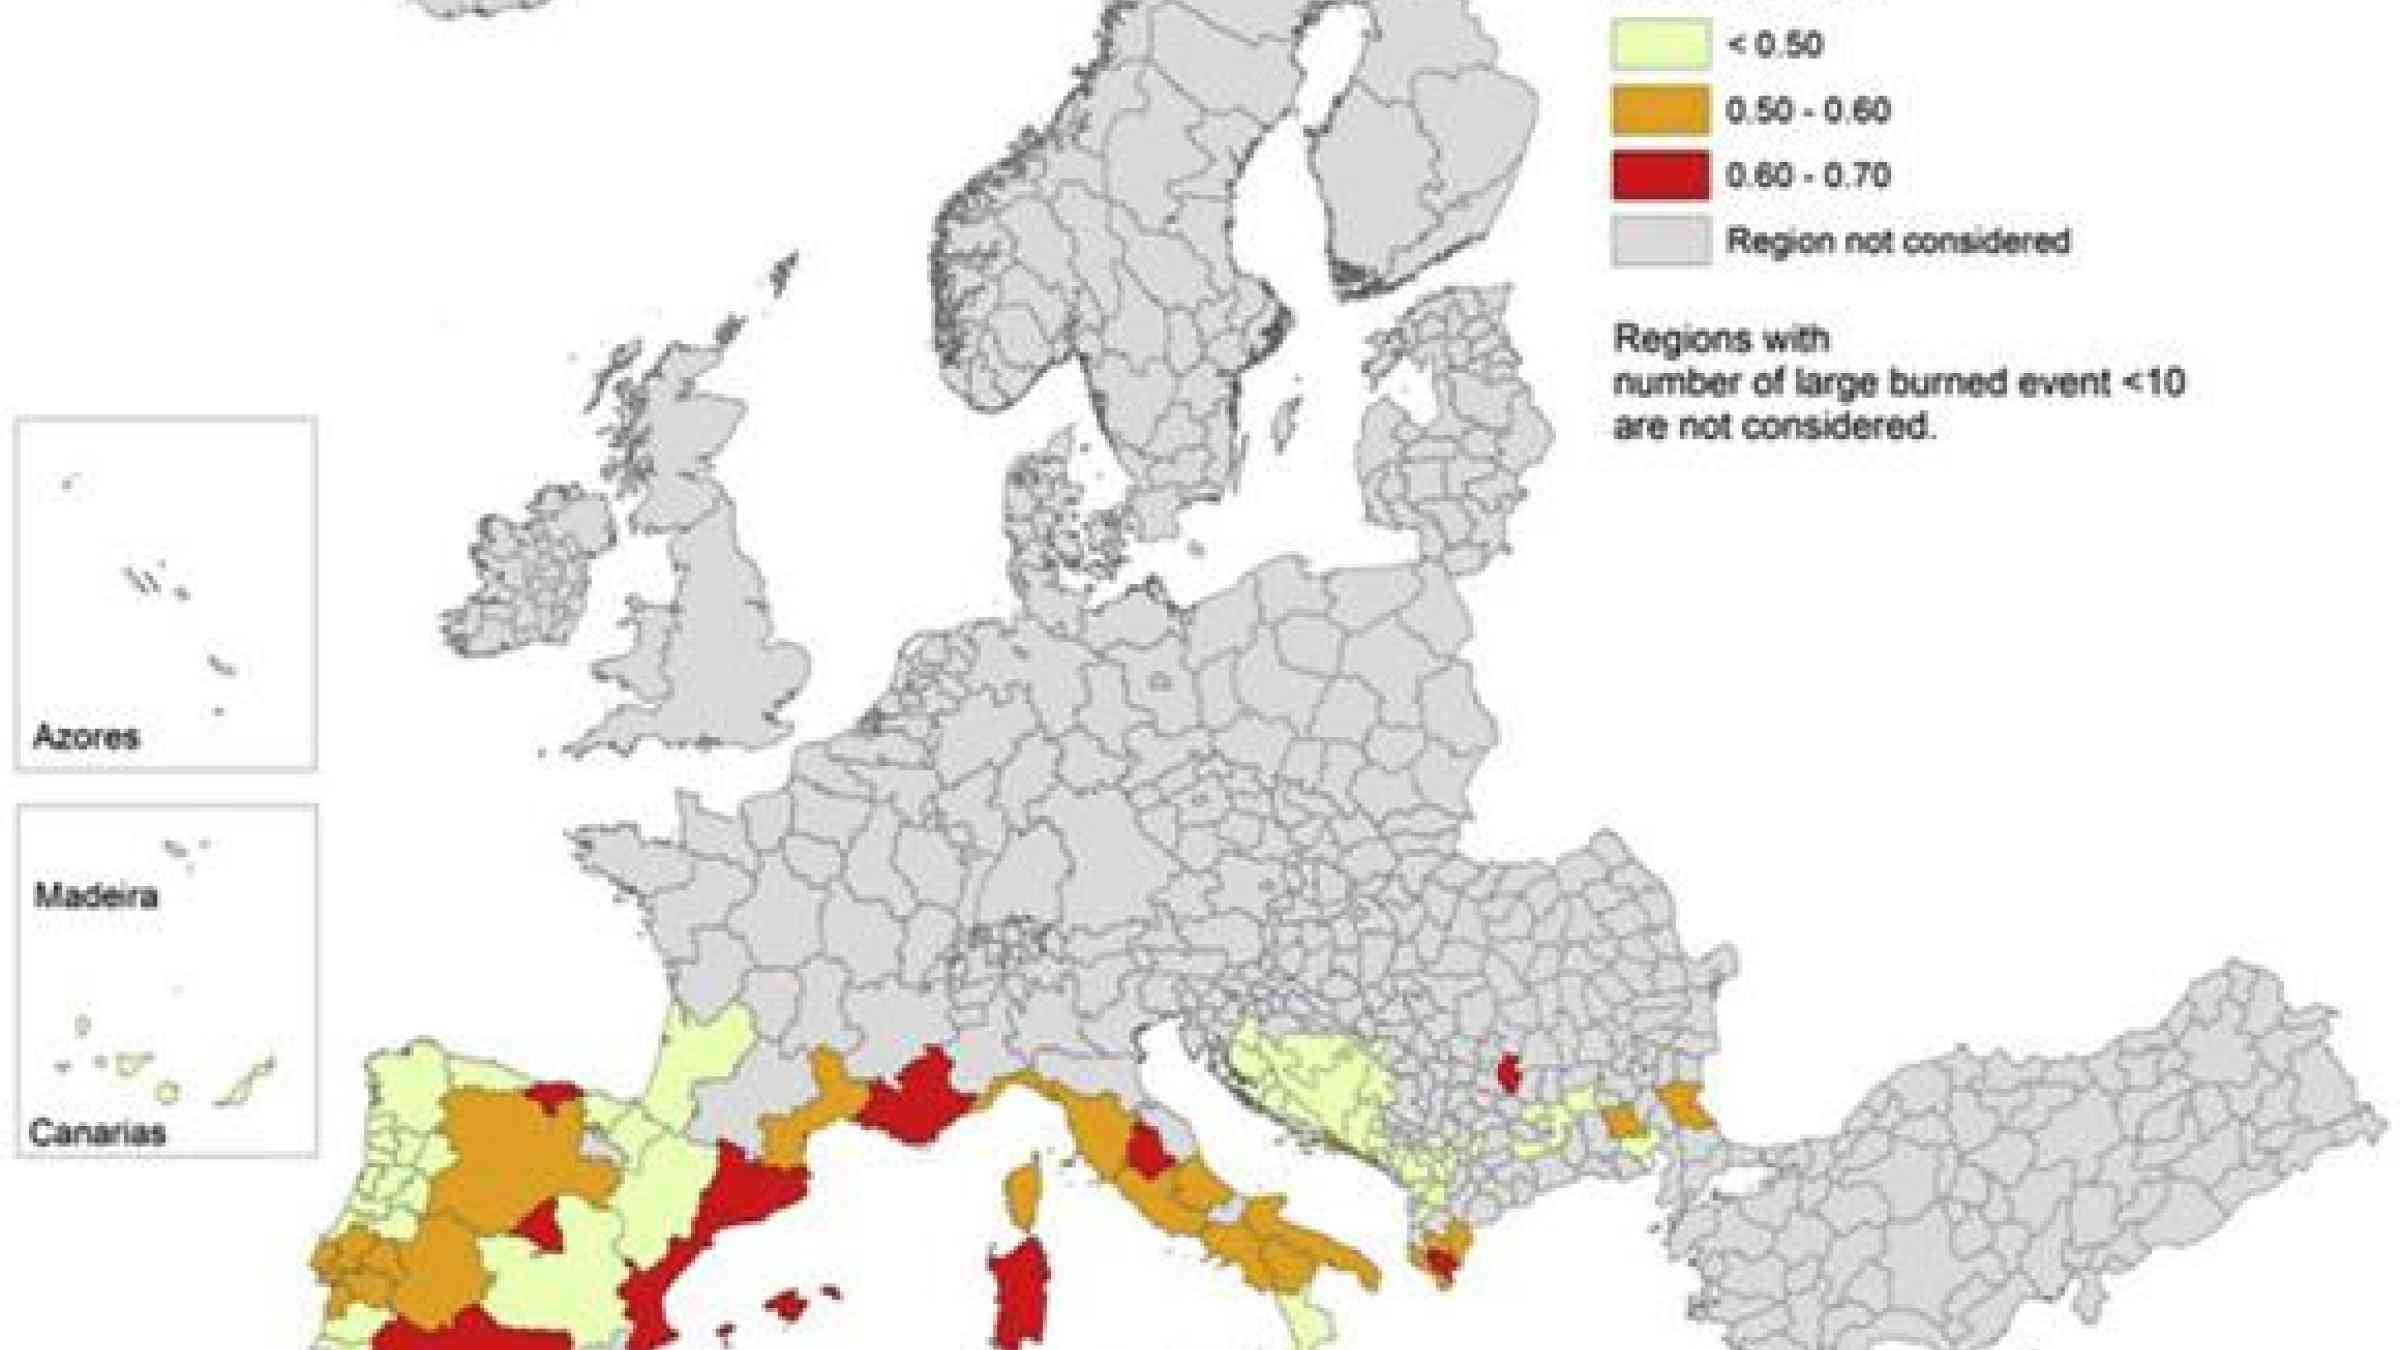 Density of the wildland-urban interface areas in administrative regions across Europe, showing regions where unmanaged land is dangerously close to cities, posing a potential fire risk. University of Leicester